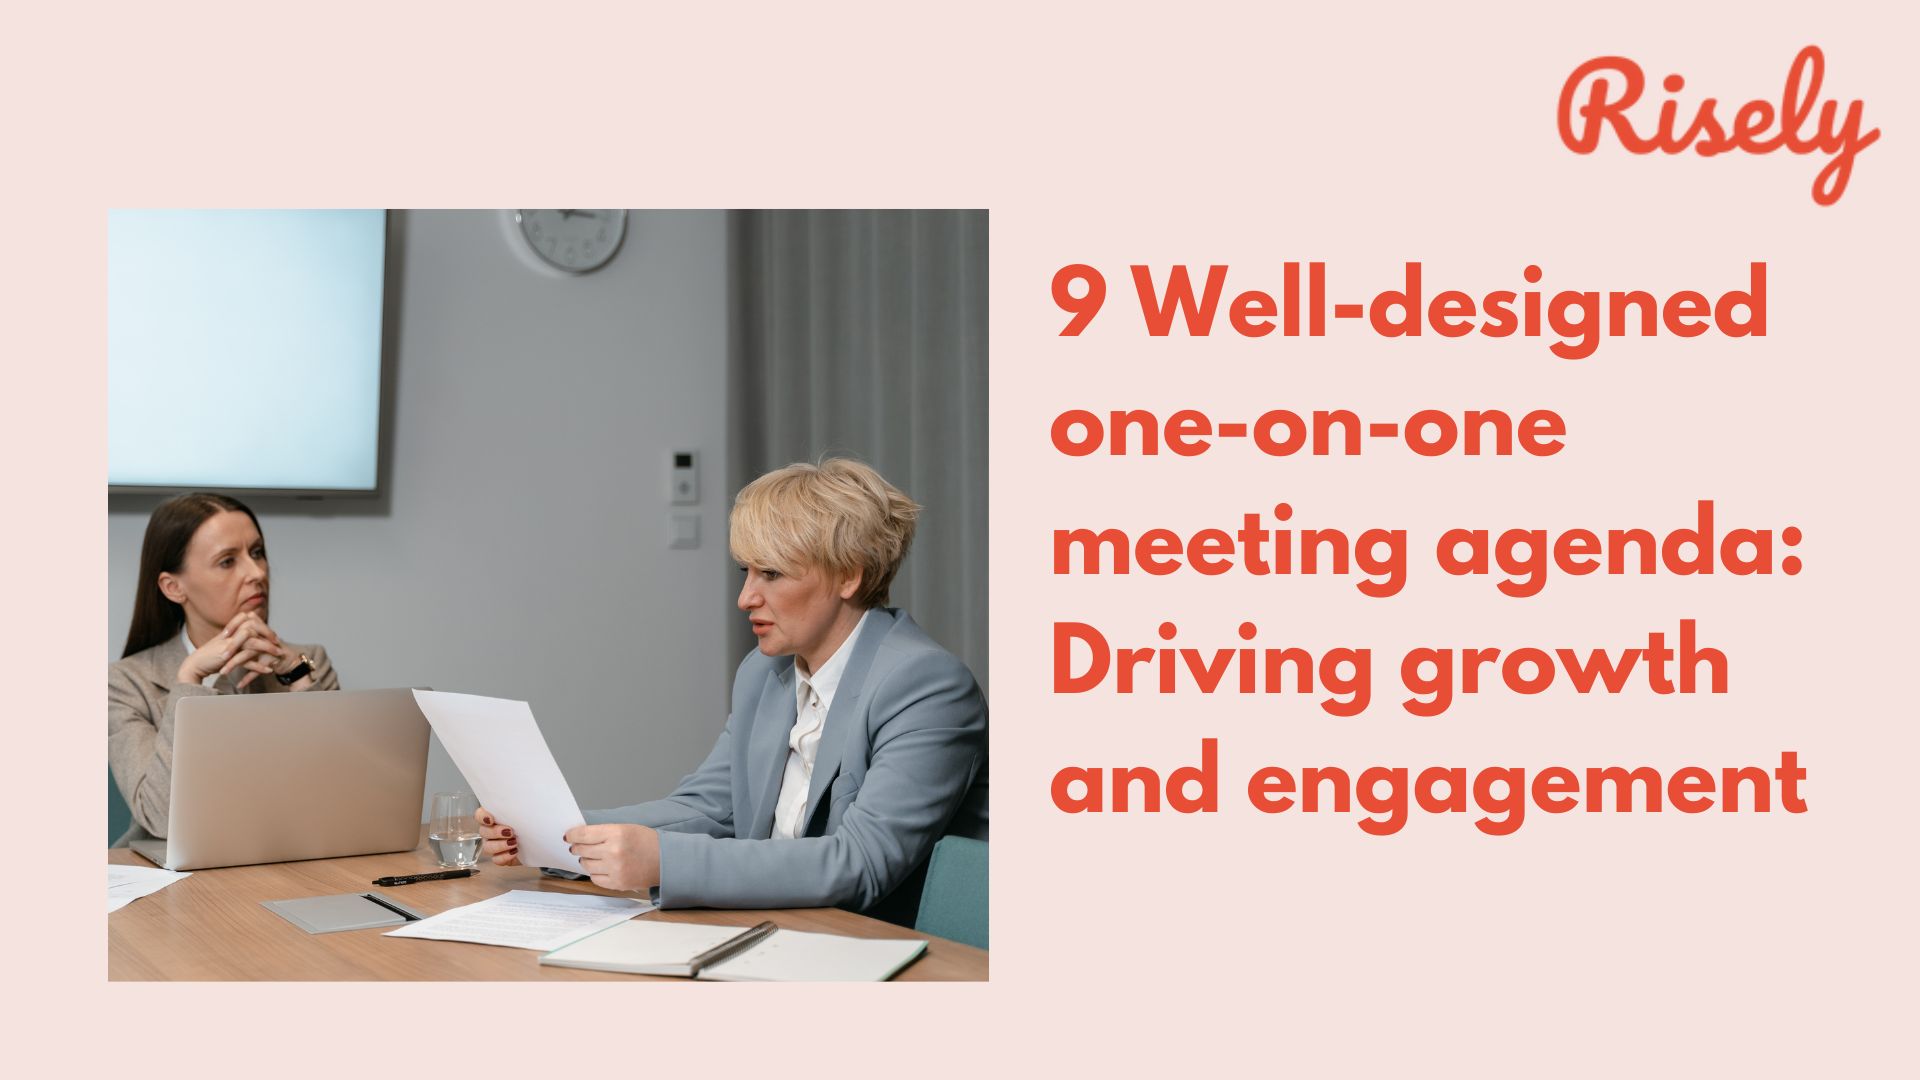 9 Well-designed one-on-one meeting agenda: Driving growth and engagement